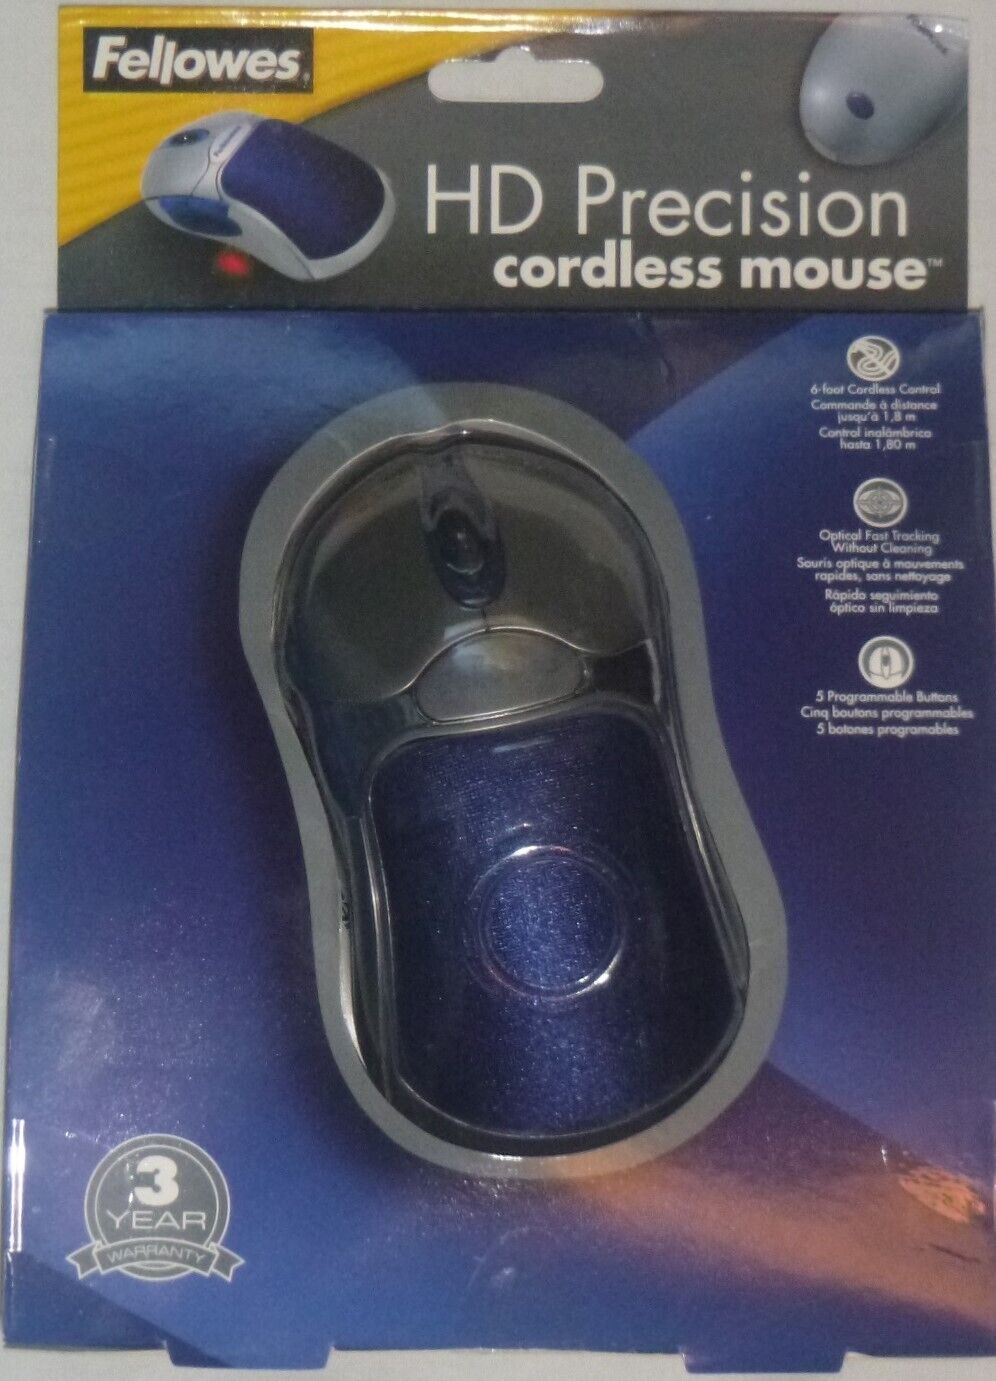 One Brand New Fellowes HD Precision Cordless Optical Mouse 98904